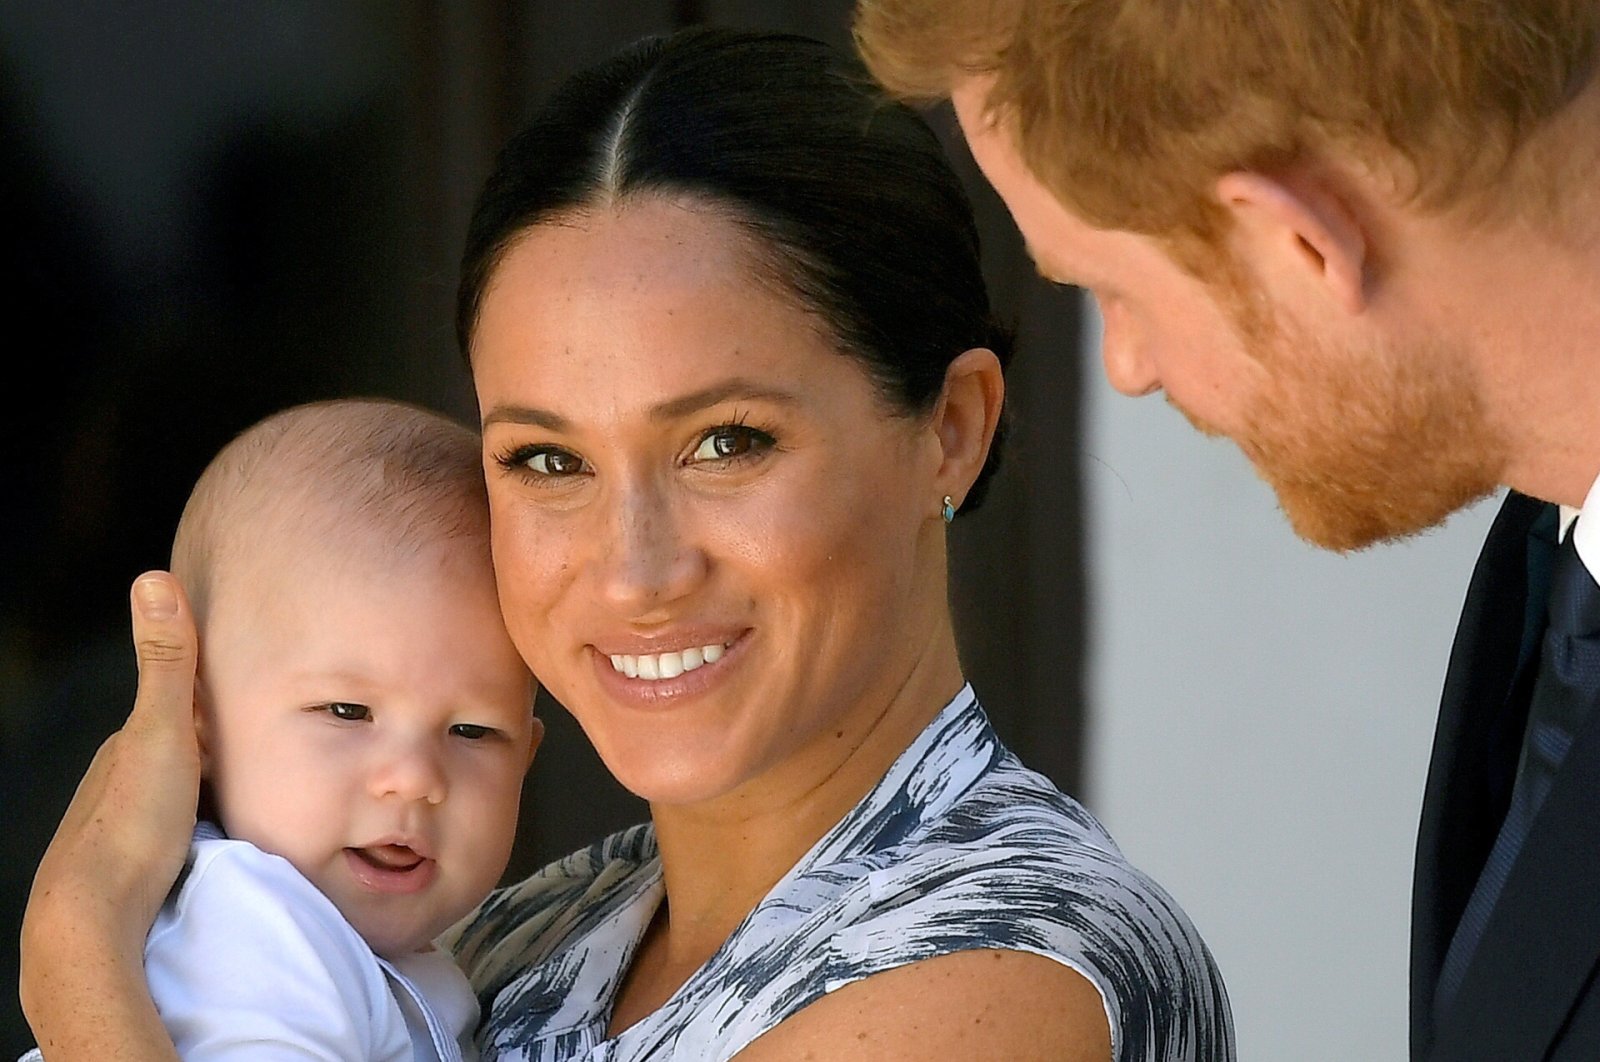 Britain's Prince Harry and his wife Meghan, Duchess of Sussex holding their son Archie, meet Archbishop Desmond Tutu (not pictured) at the Desmond & Leah Tutu Legacy Foundation in Cape Town, South Africa, Sept. 25, 2019. (Reuters Photo)